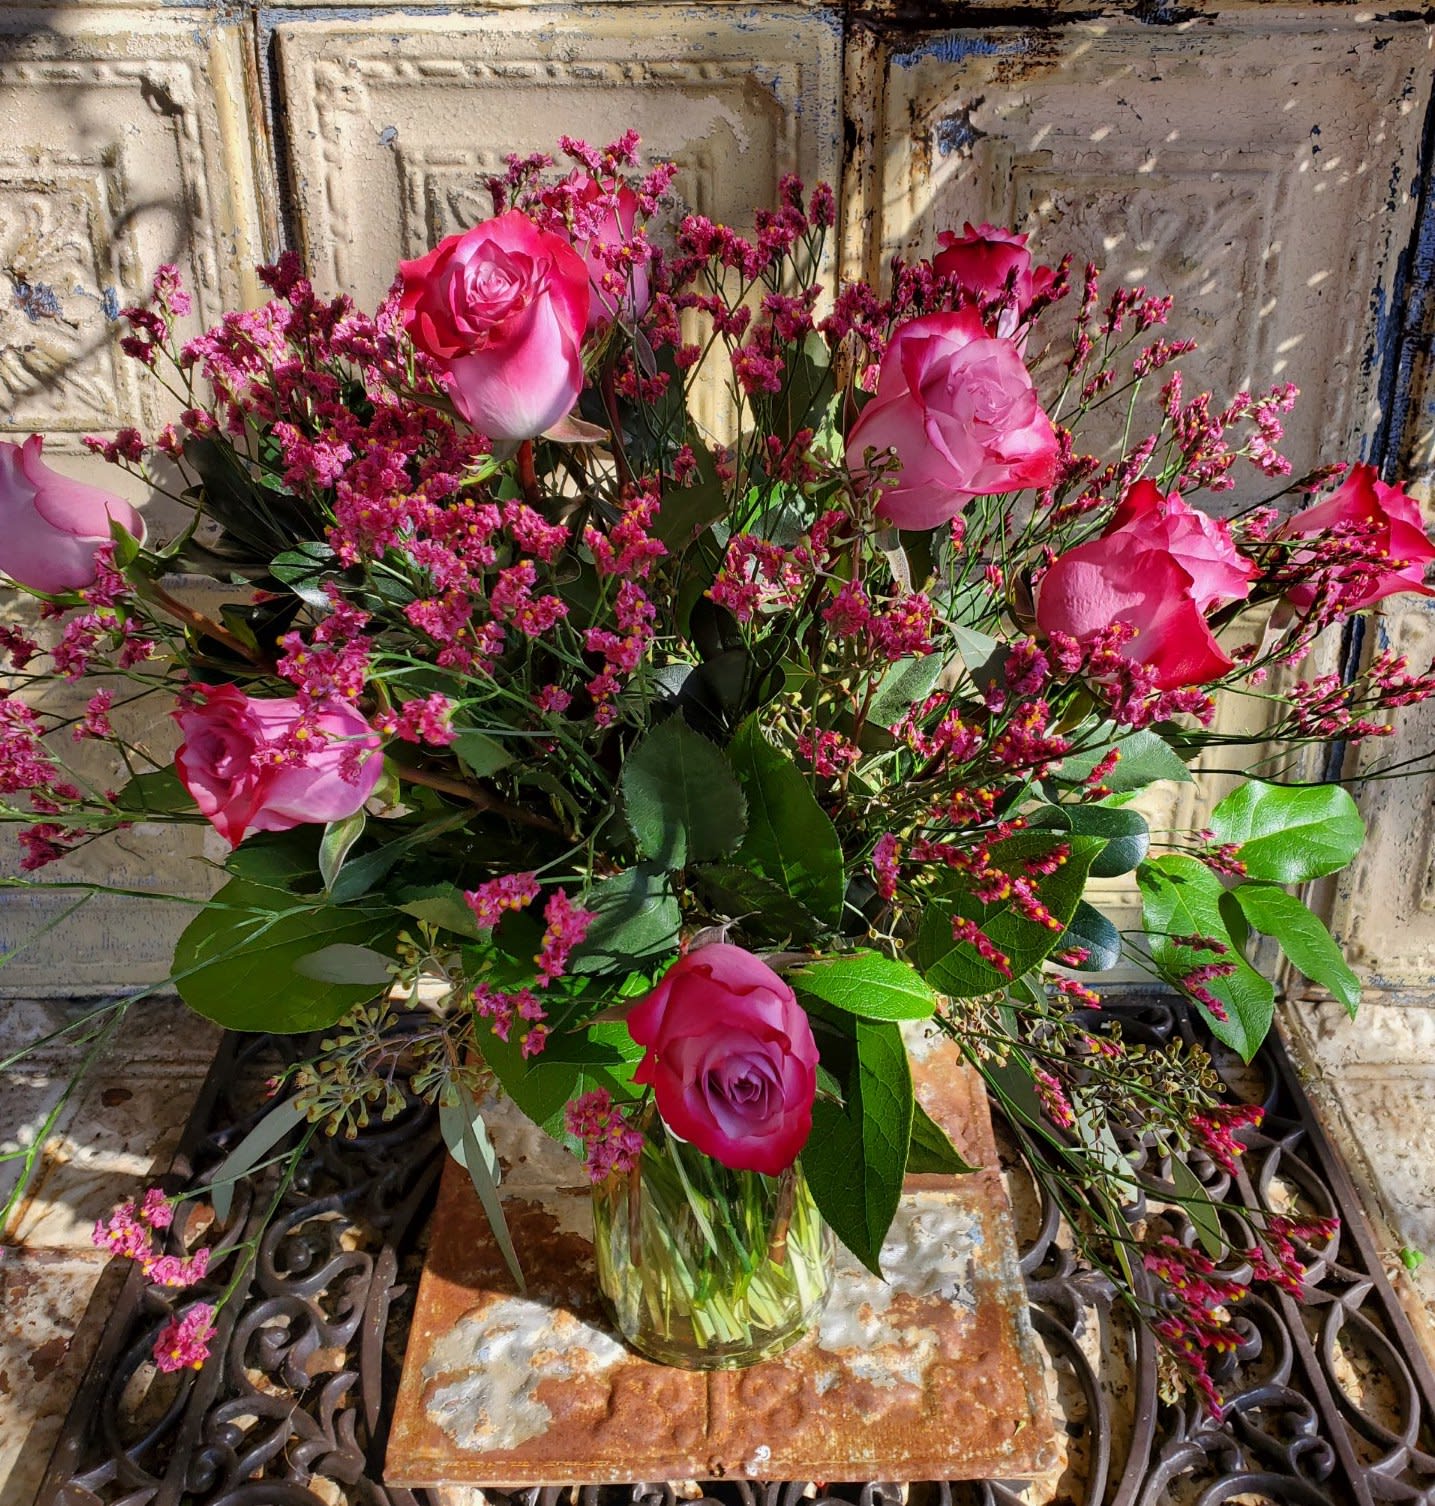 Juliet Capulet - Give the gift of a fun, flirty hot pink arrangement with roses, filler, and foliage